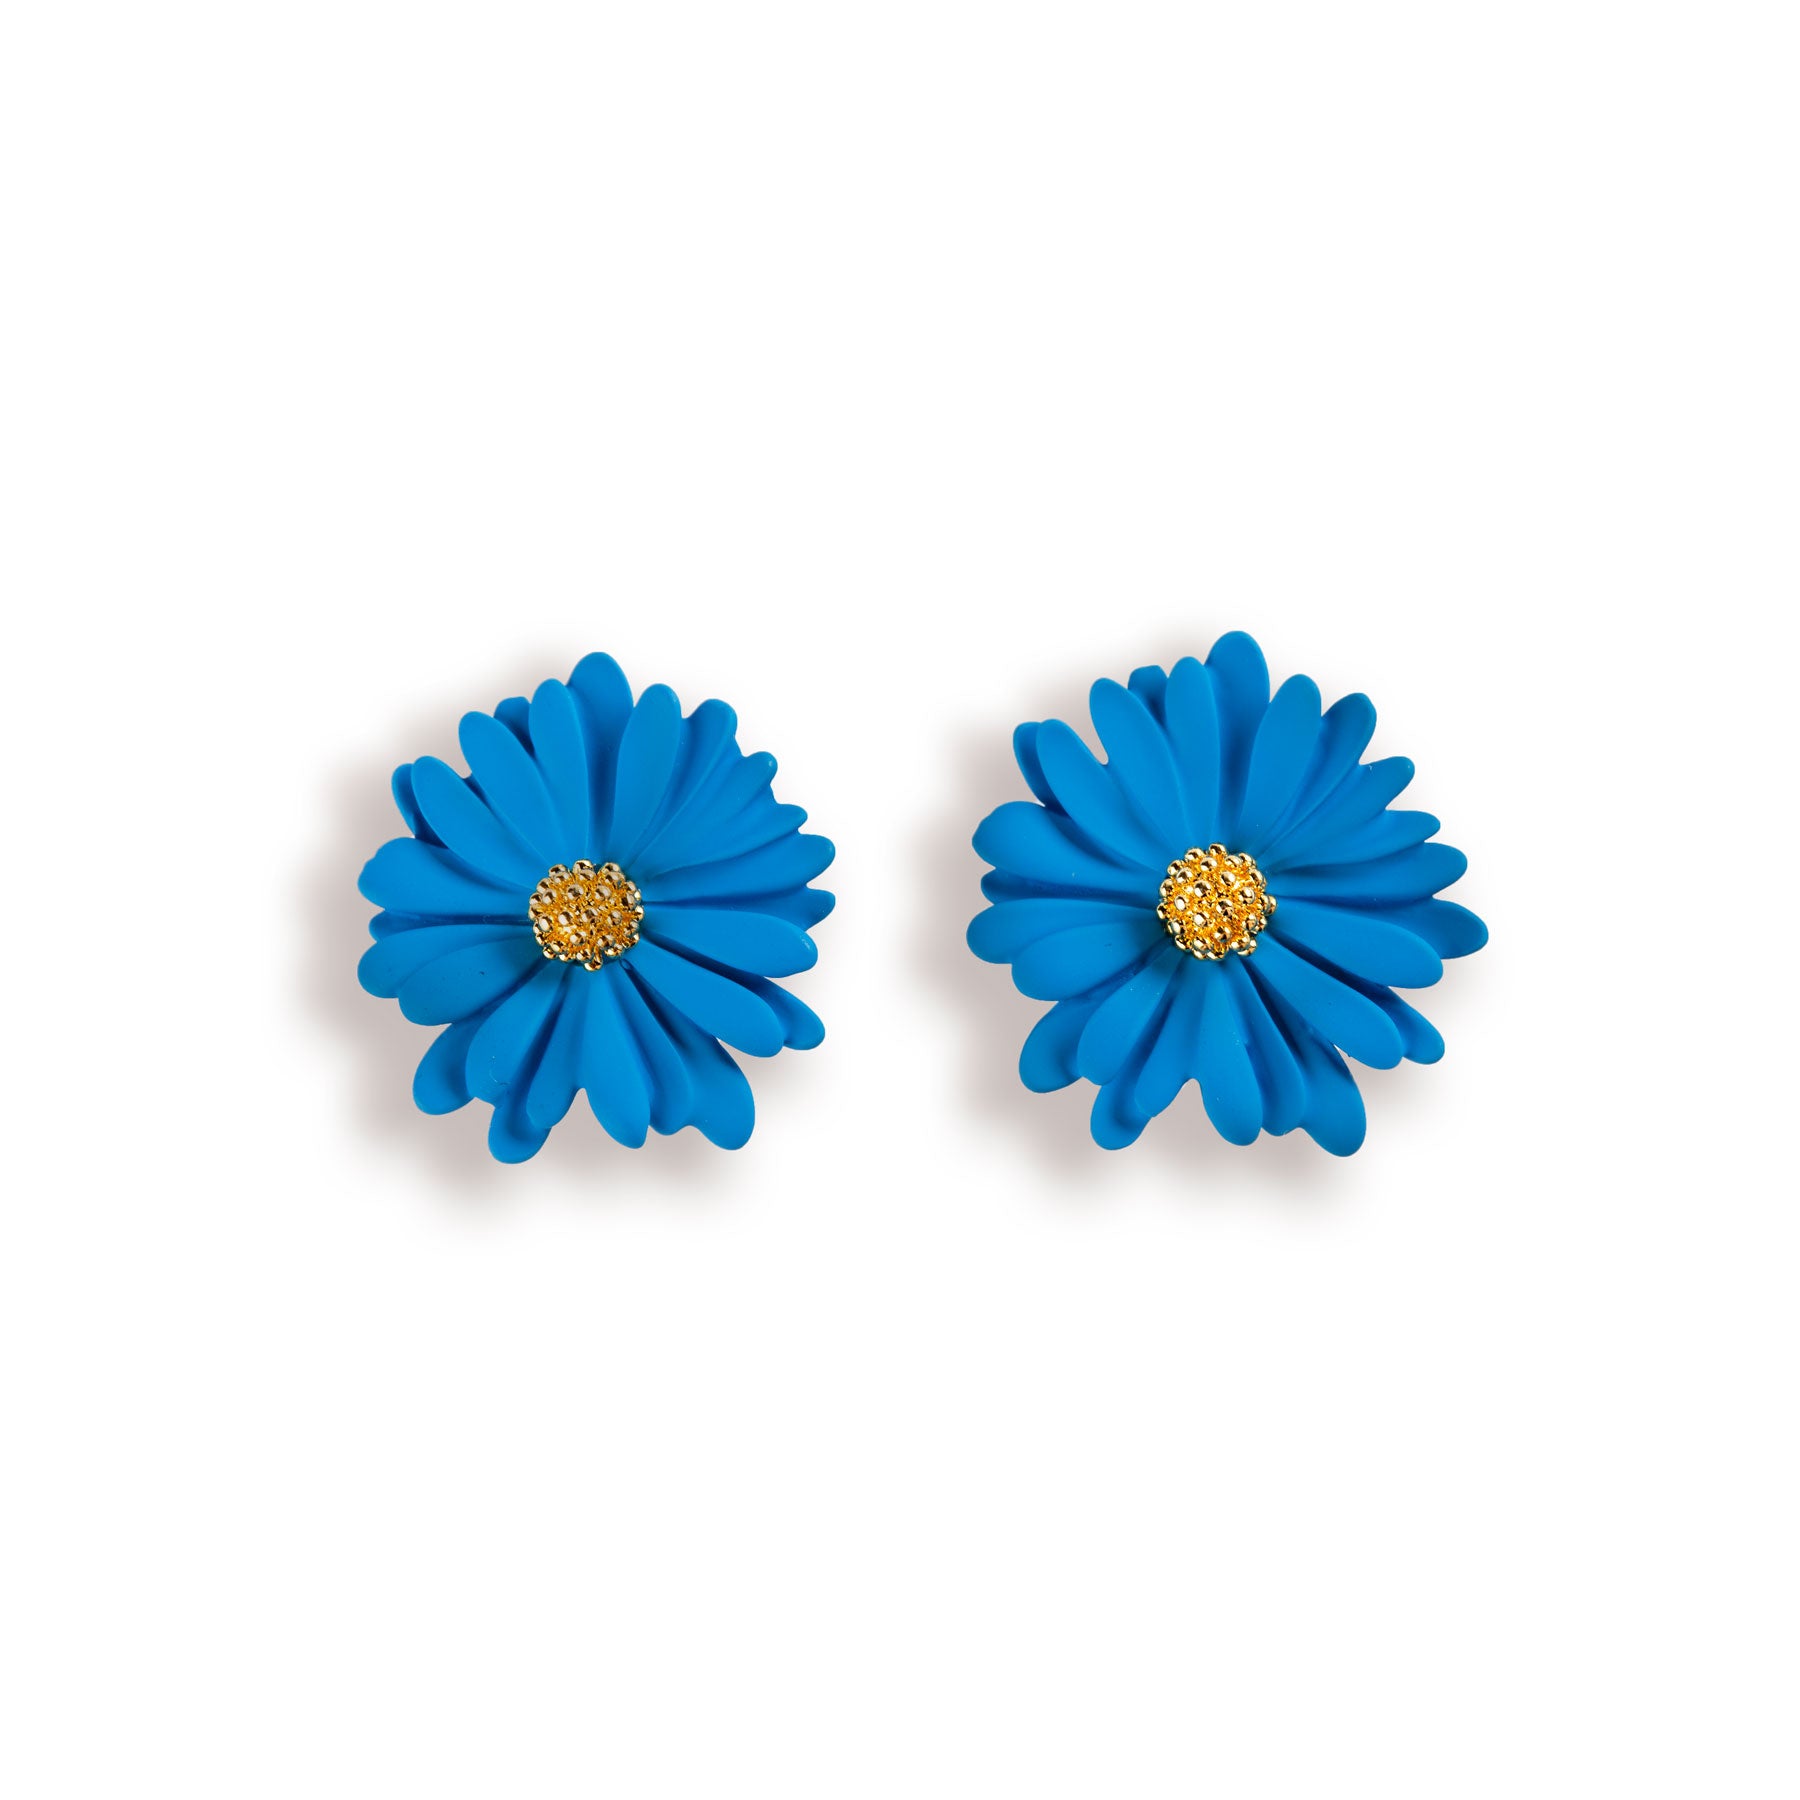 GOLDEN METAL DAISIES EARRINGS NEON BLUE COLOR HAND PAINTED